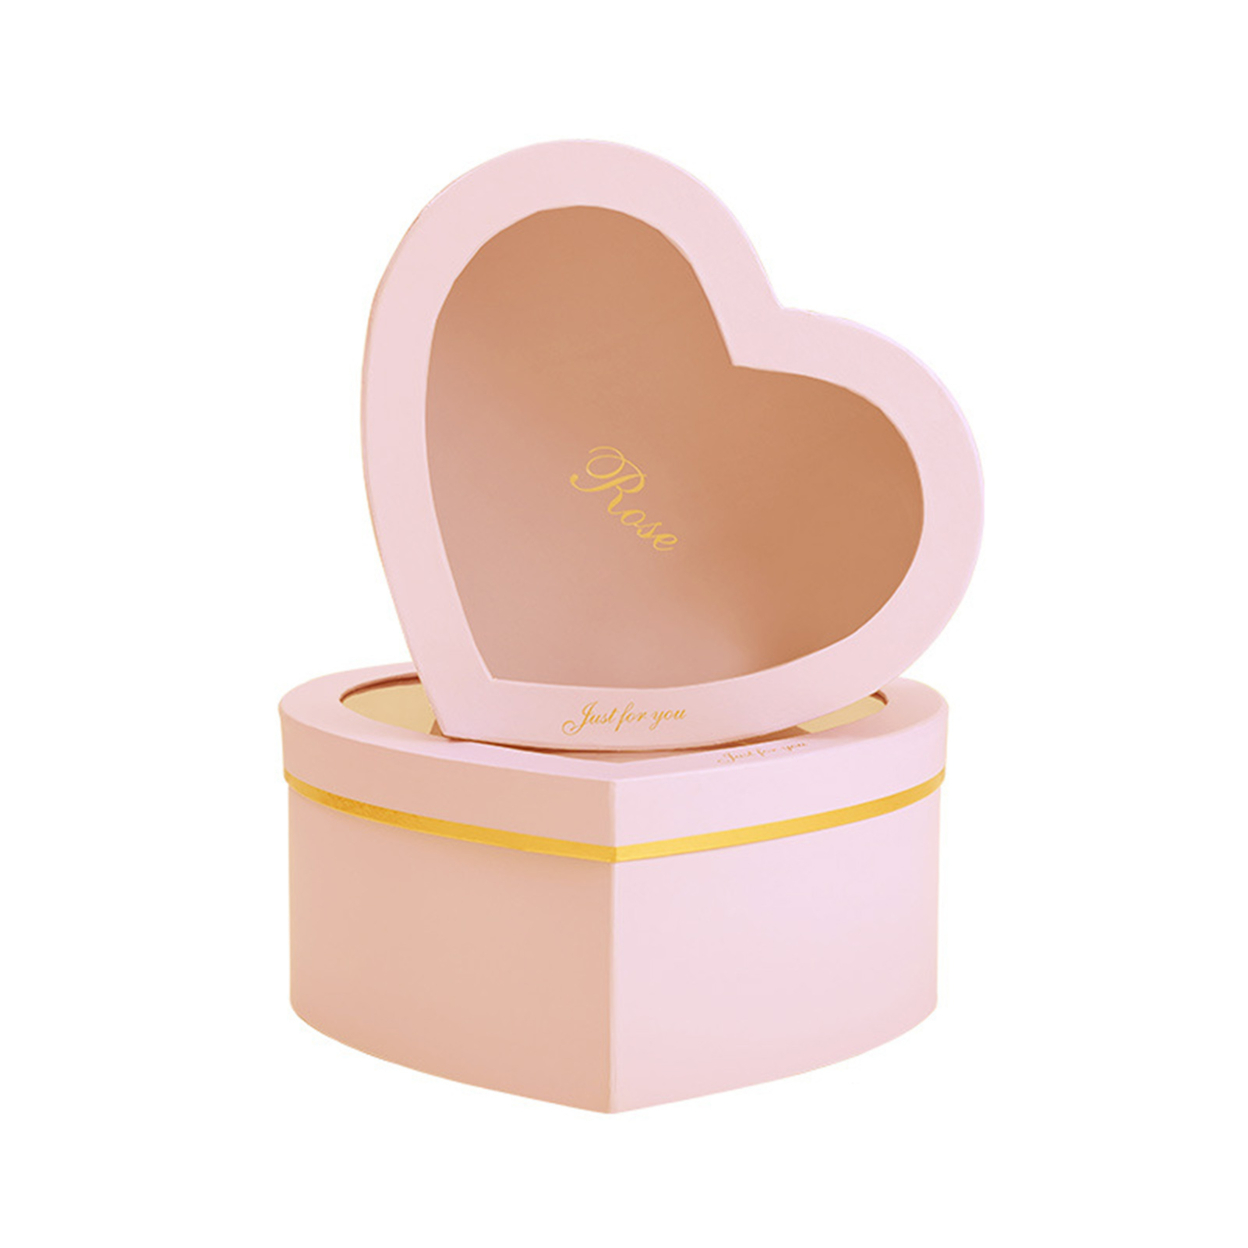 2Pcs/Set Flower Box Heart Shaped Hot Stamping Paper Florist Packaging Rose Gift Case for Party - pink